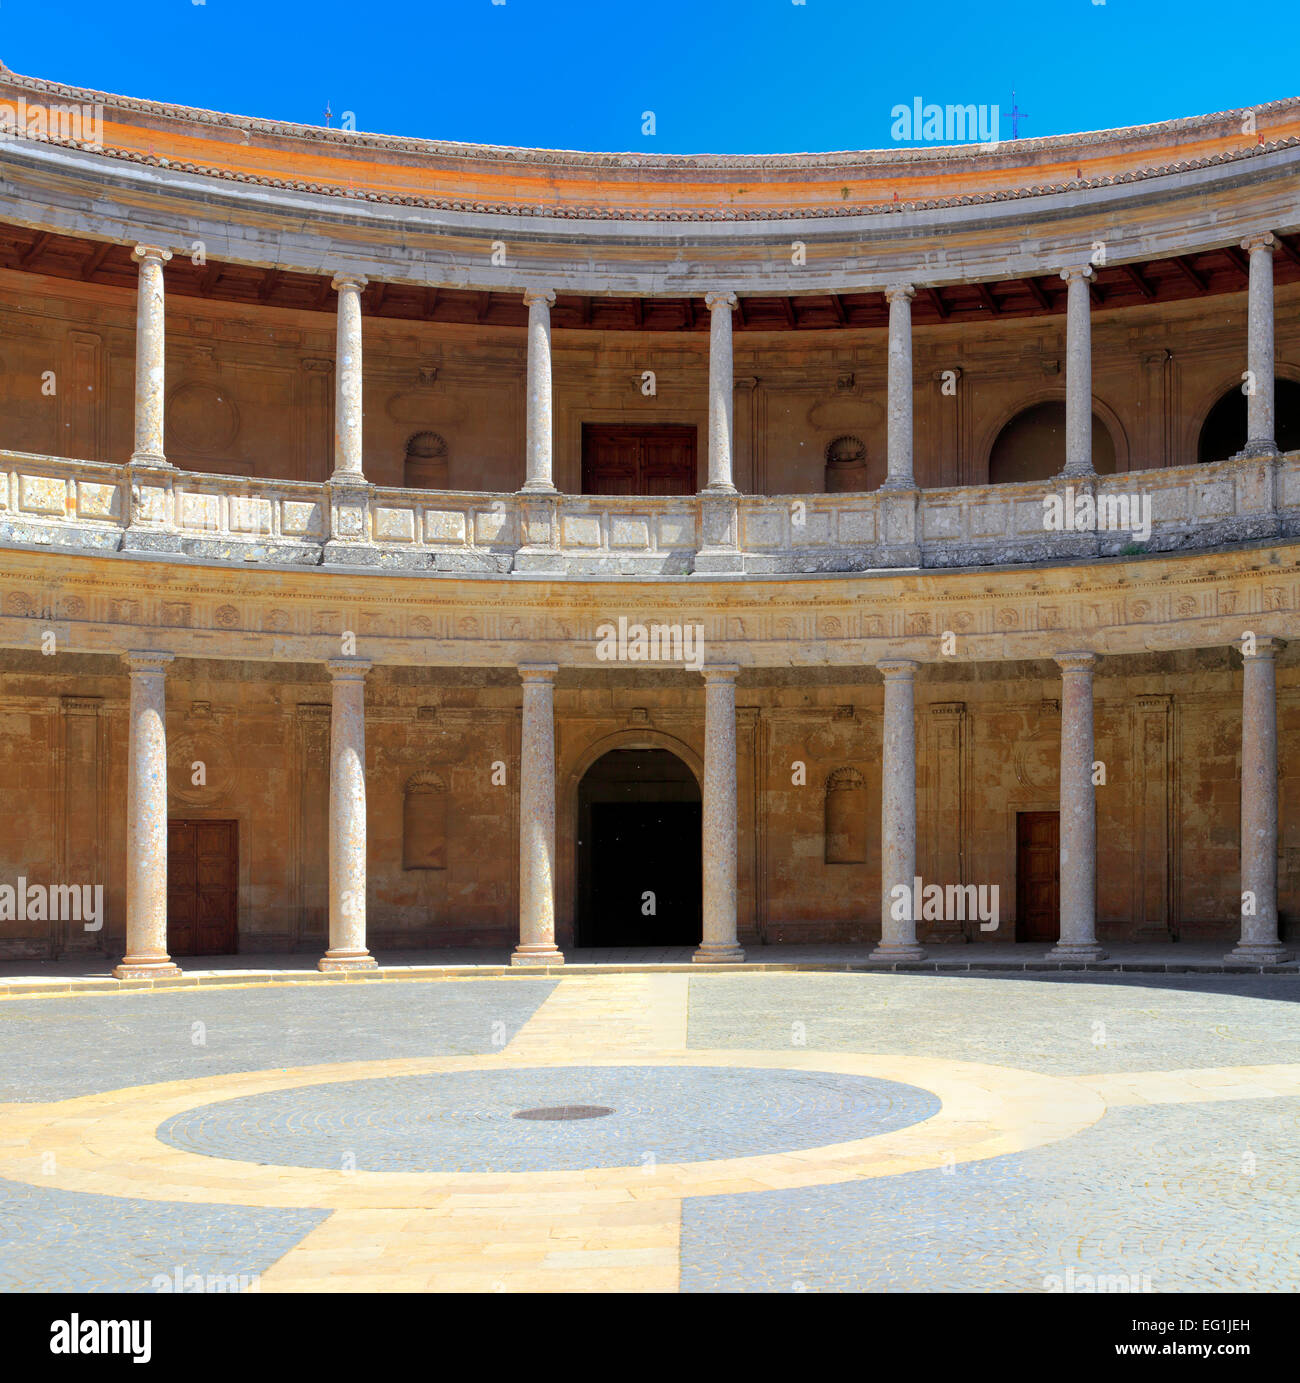 Patio of palace of Charles V, Alhambra, Granada, Andalusia, Spain Stock Photo